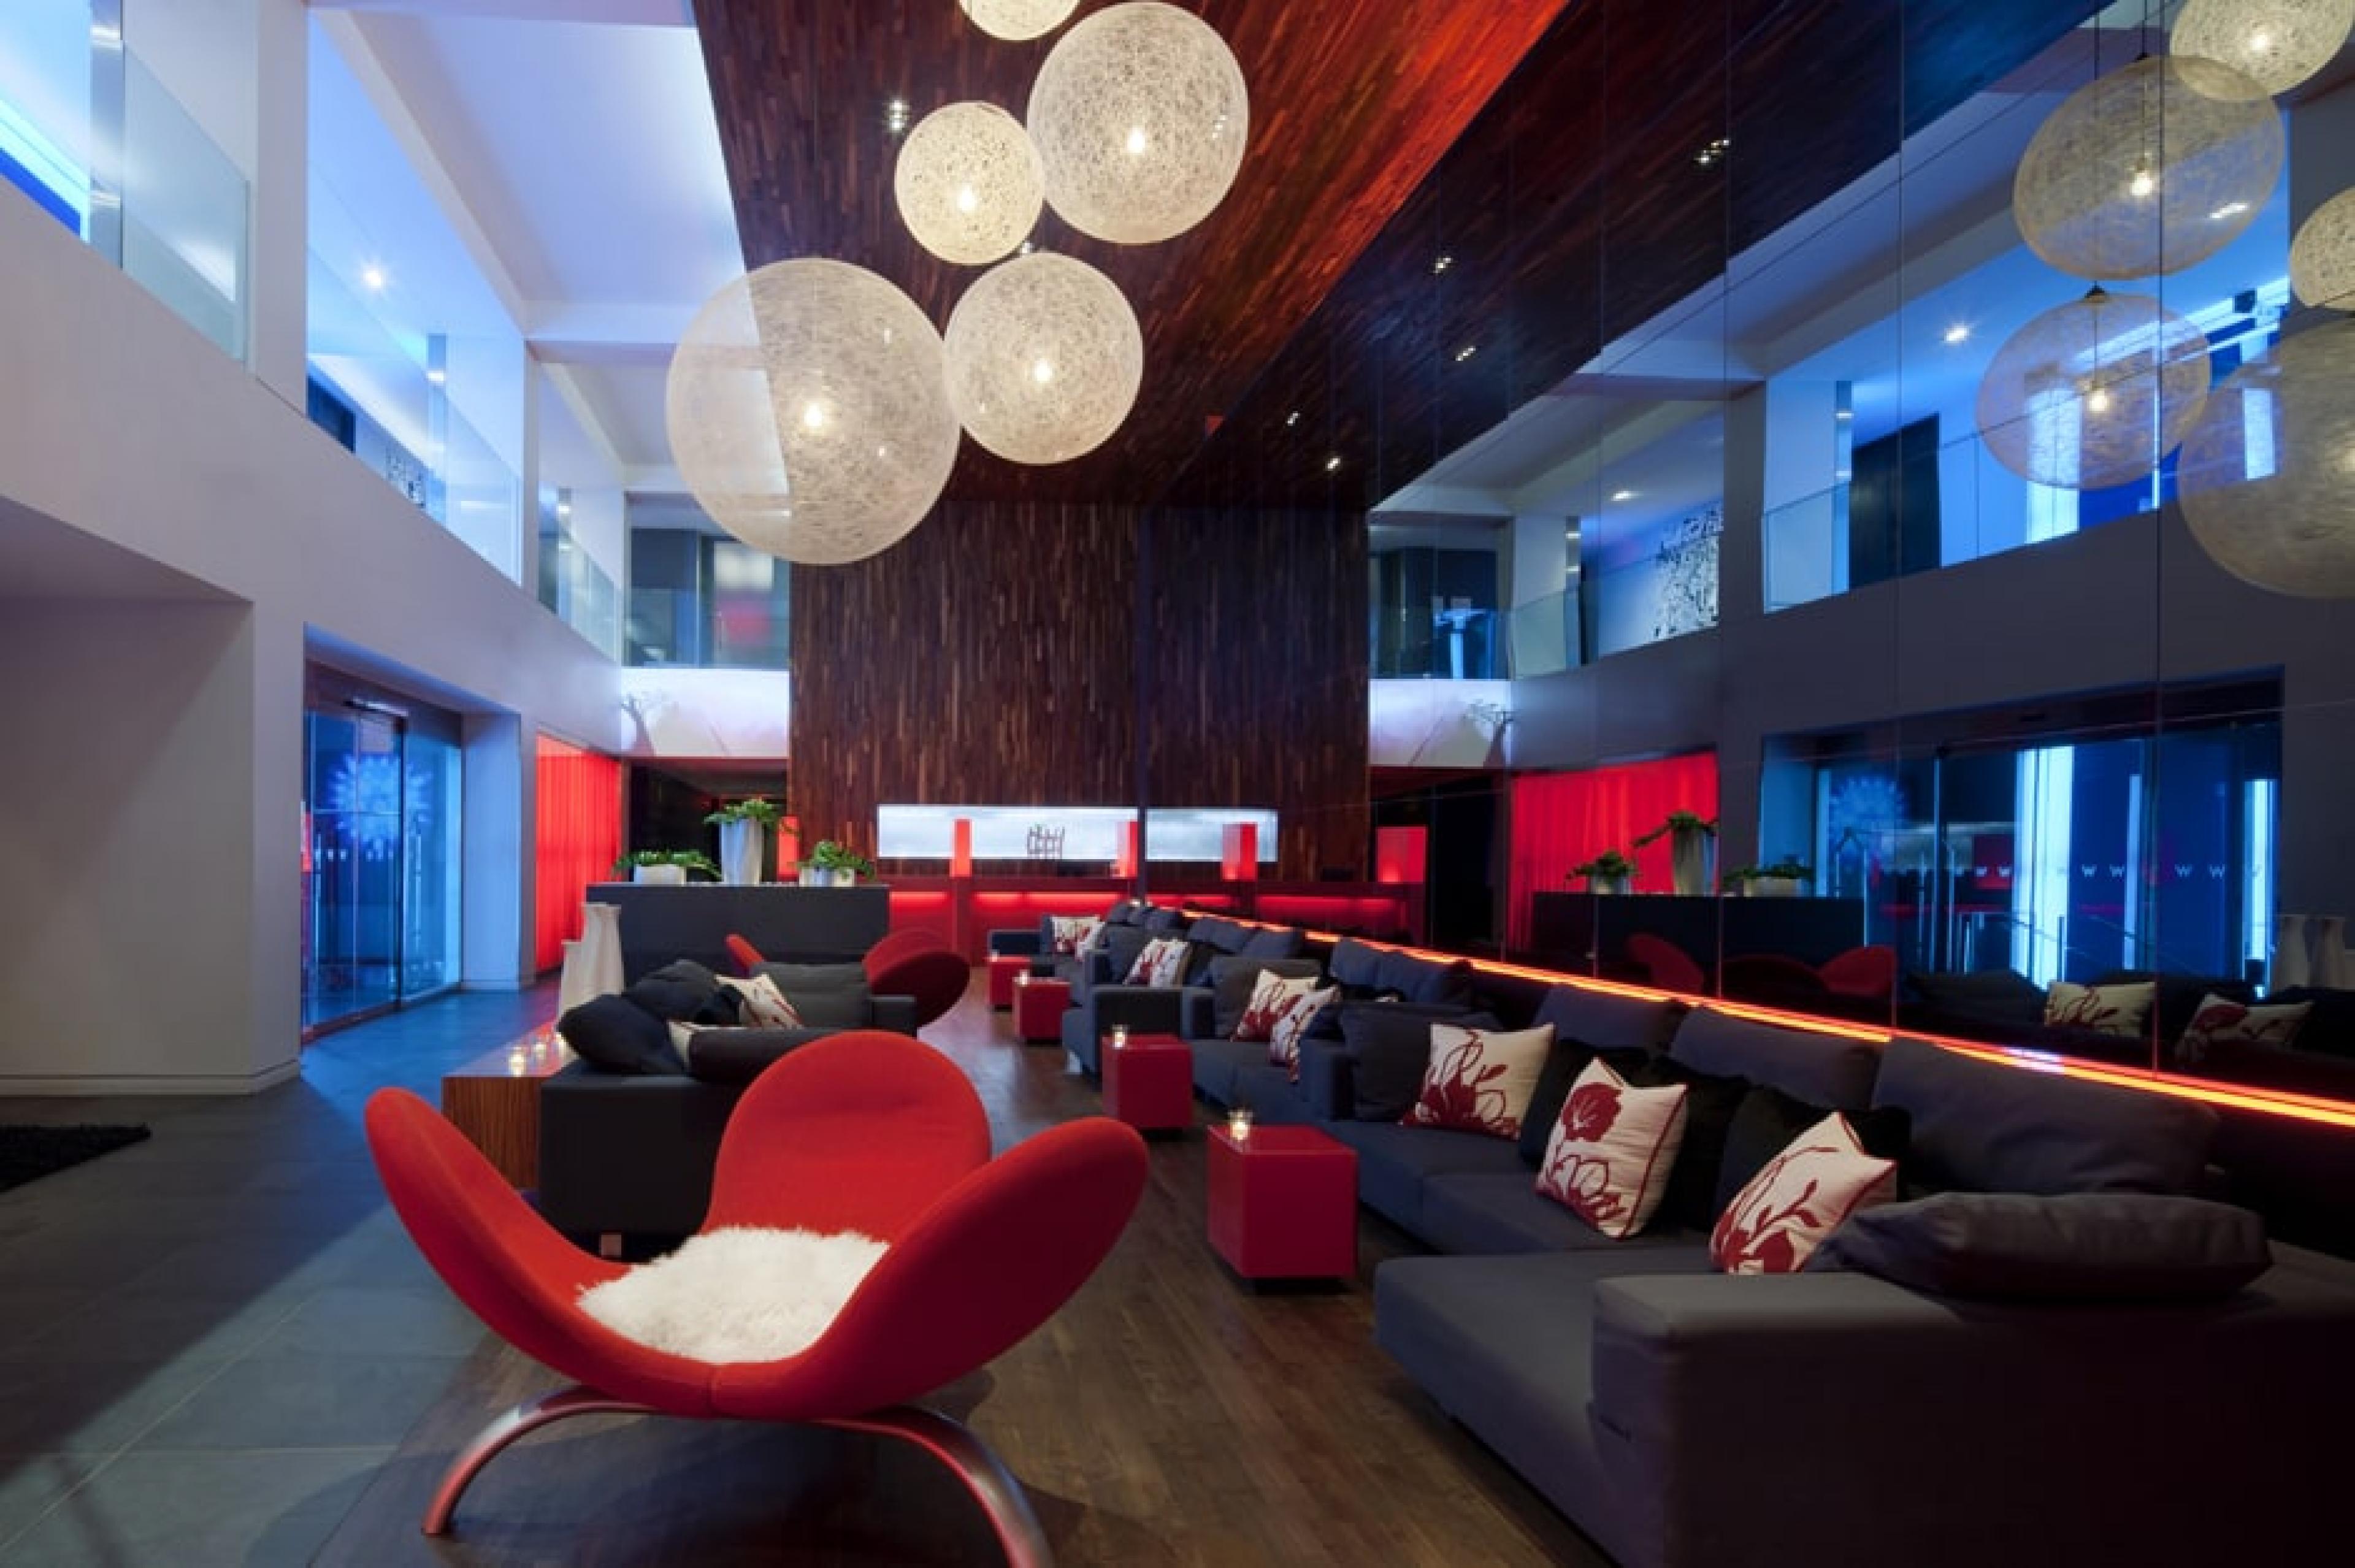 Interior View - W Montreal, Montreal, Canada - Courtesy W Hotels Worldwide